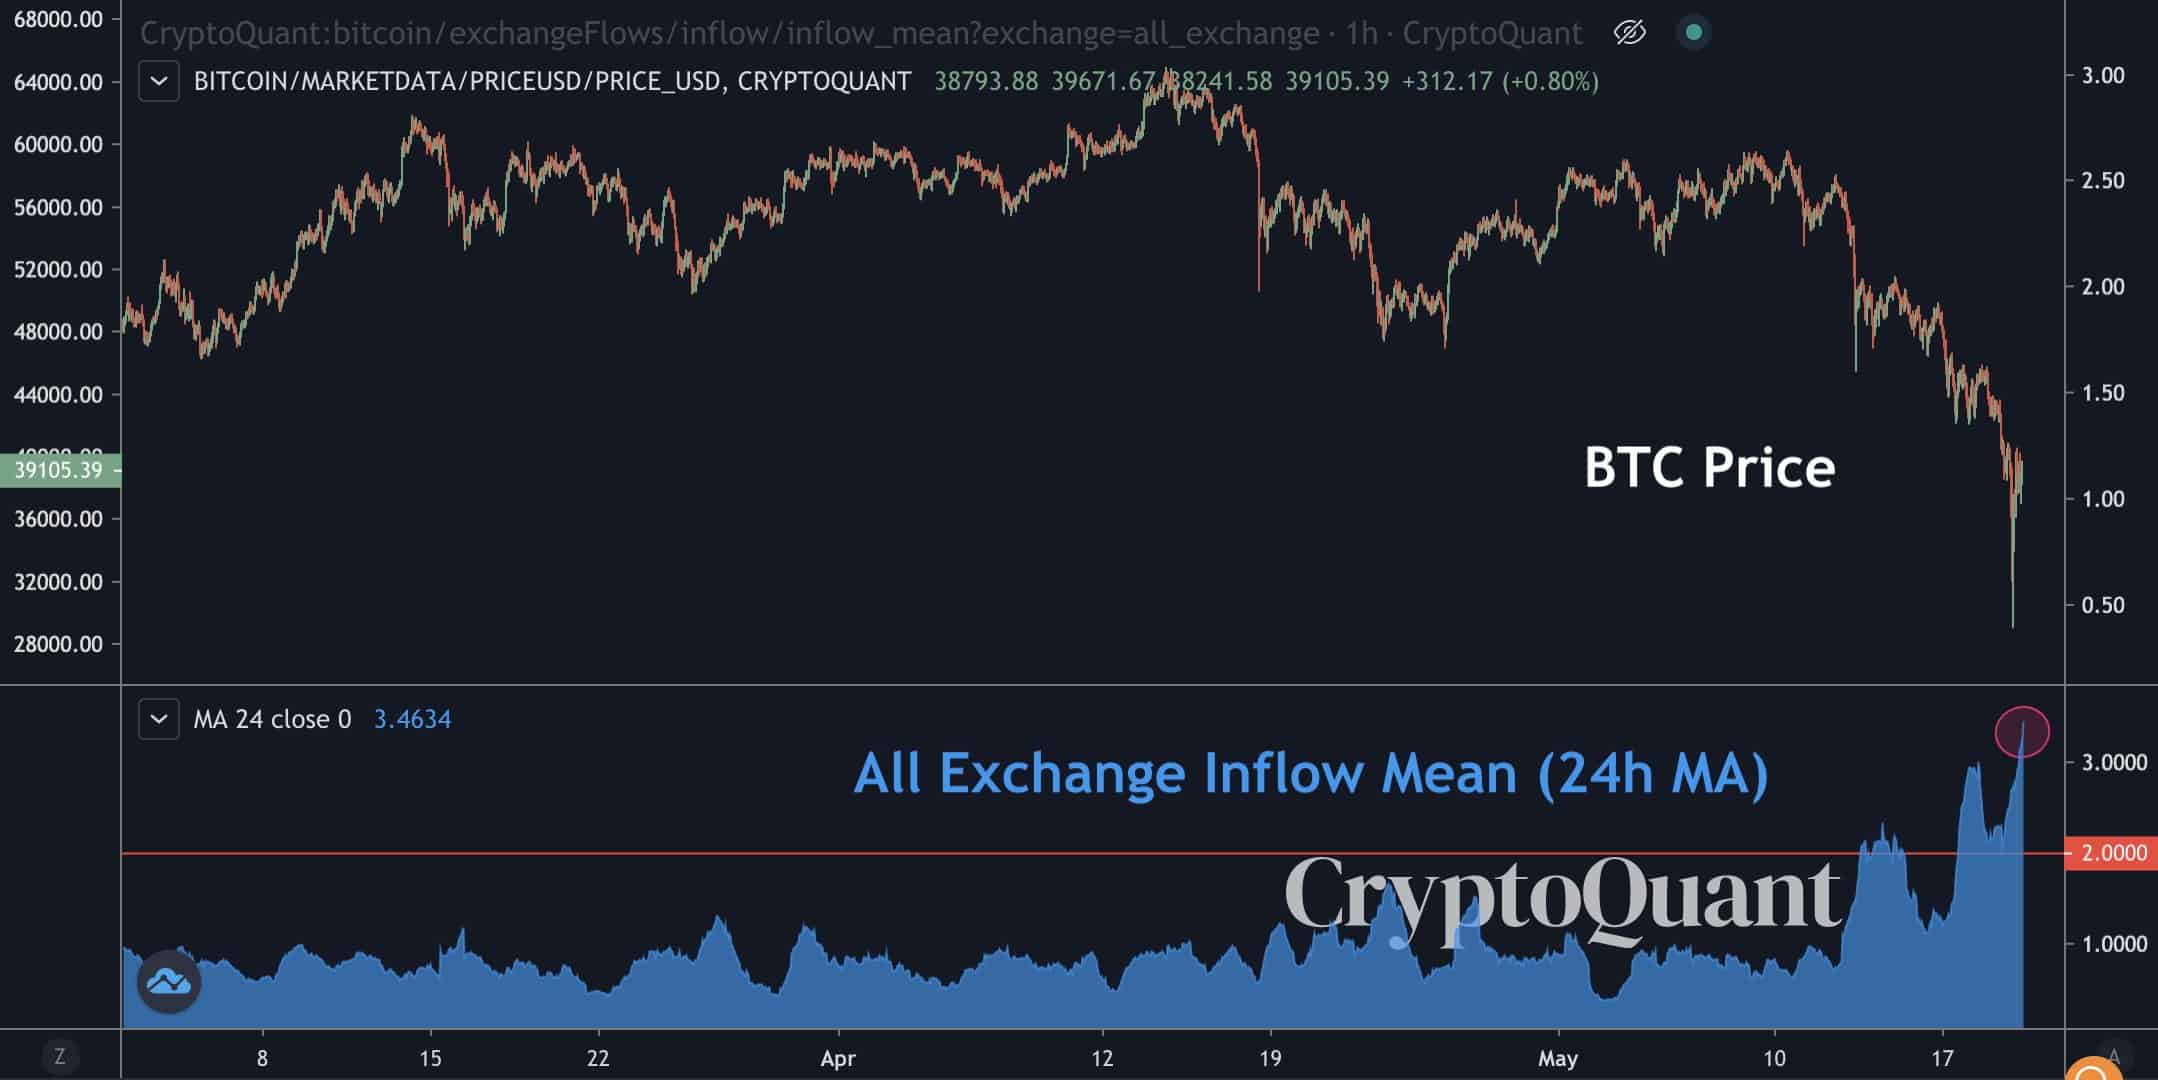 Bitcoin Price / Whales Depositing to Exchanges. Source: CryptoQuant